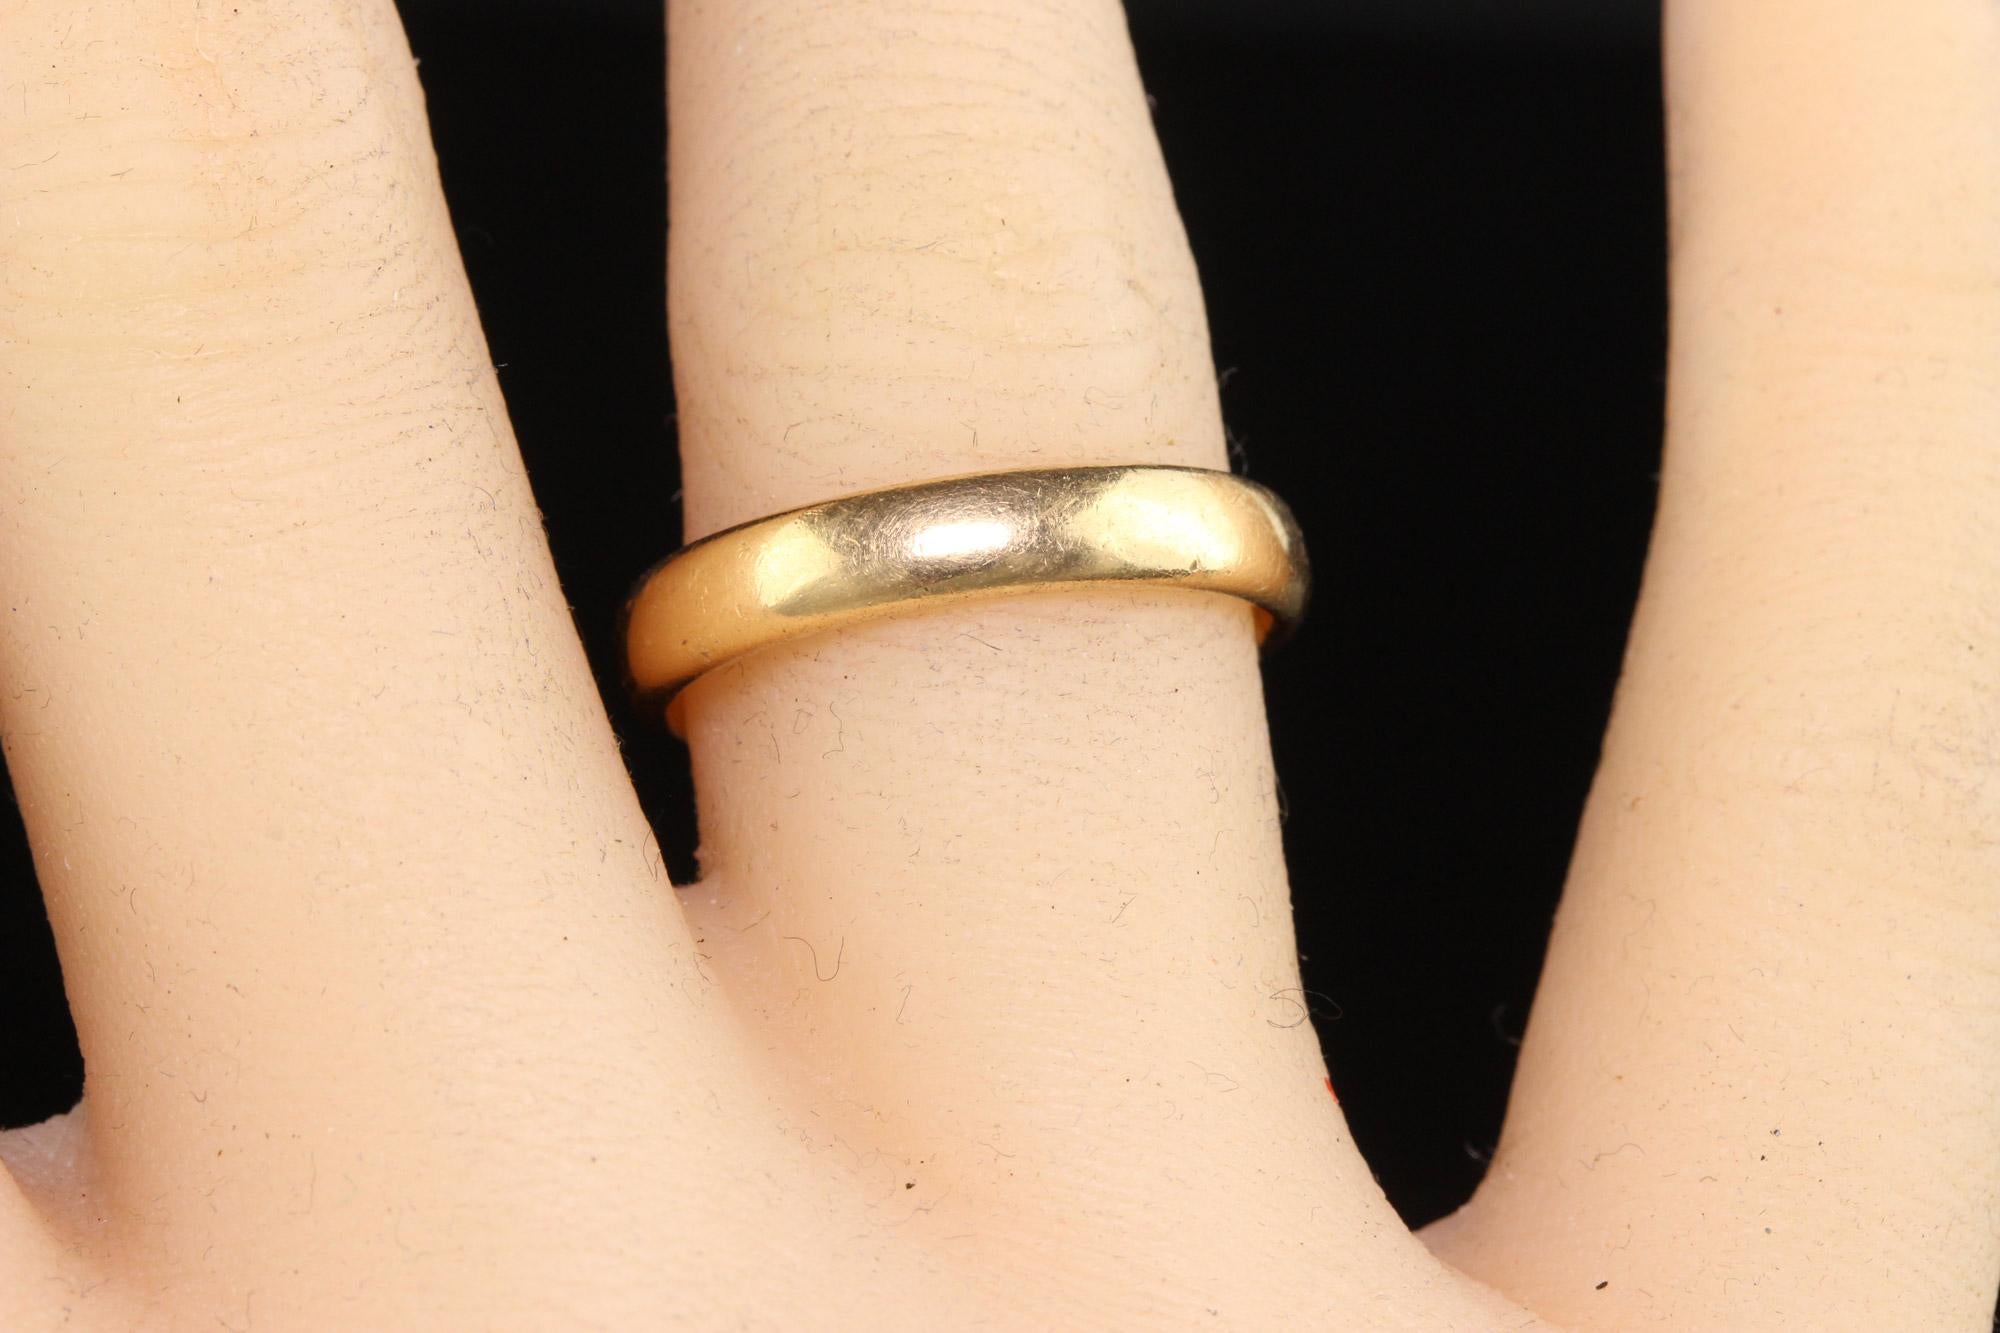 Antique Art Deco 14K Yellow Gold Classic Plain Wedding Band - Size 8 1/4 In Good Condition For Sale In Great Neck, NY